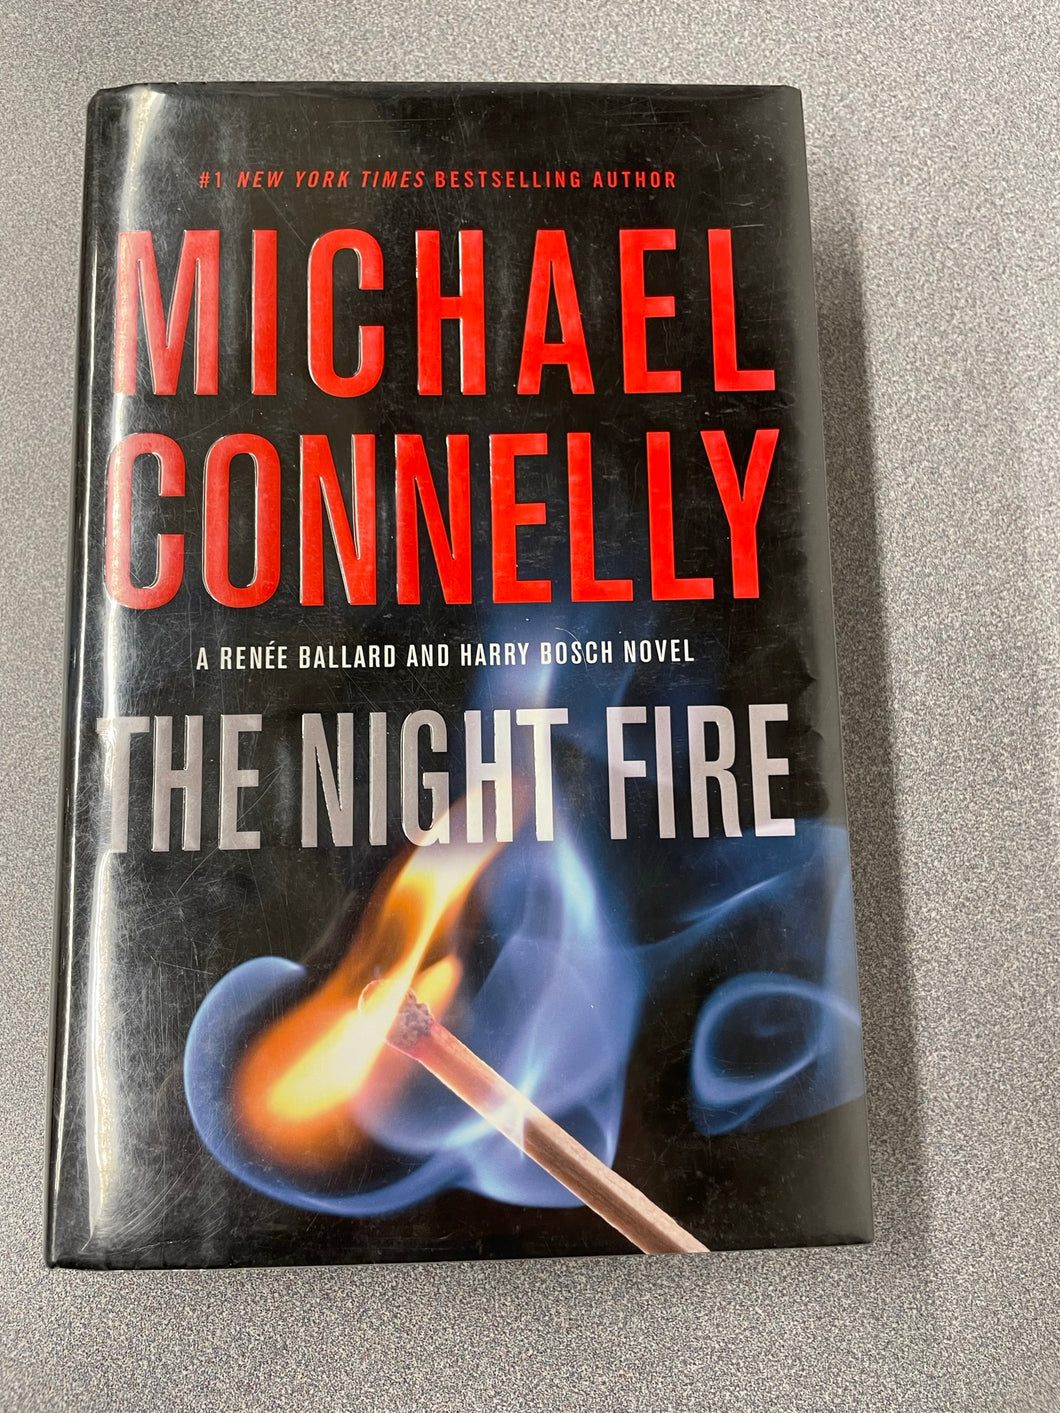 Connelly, Michael, The Night Fire [2019] RBS 3/23